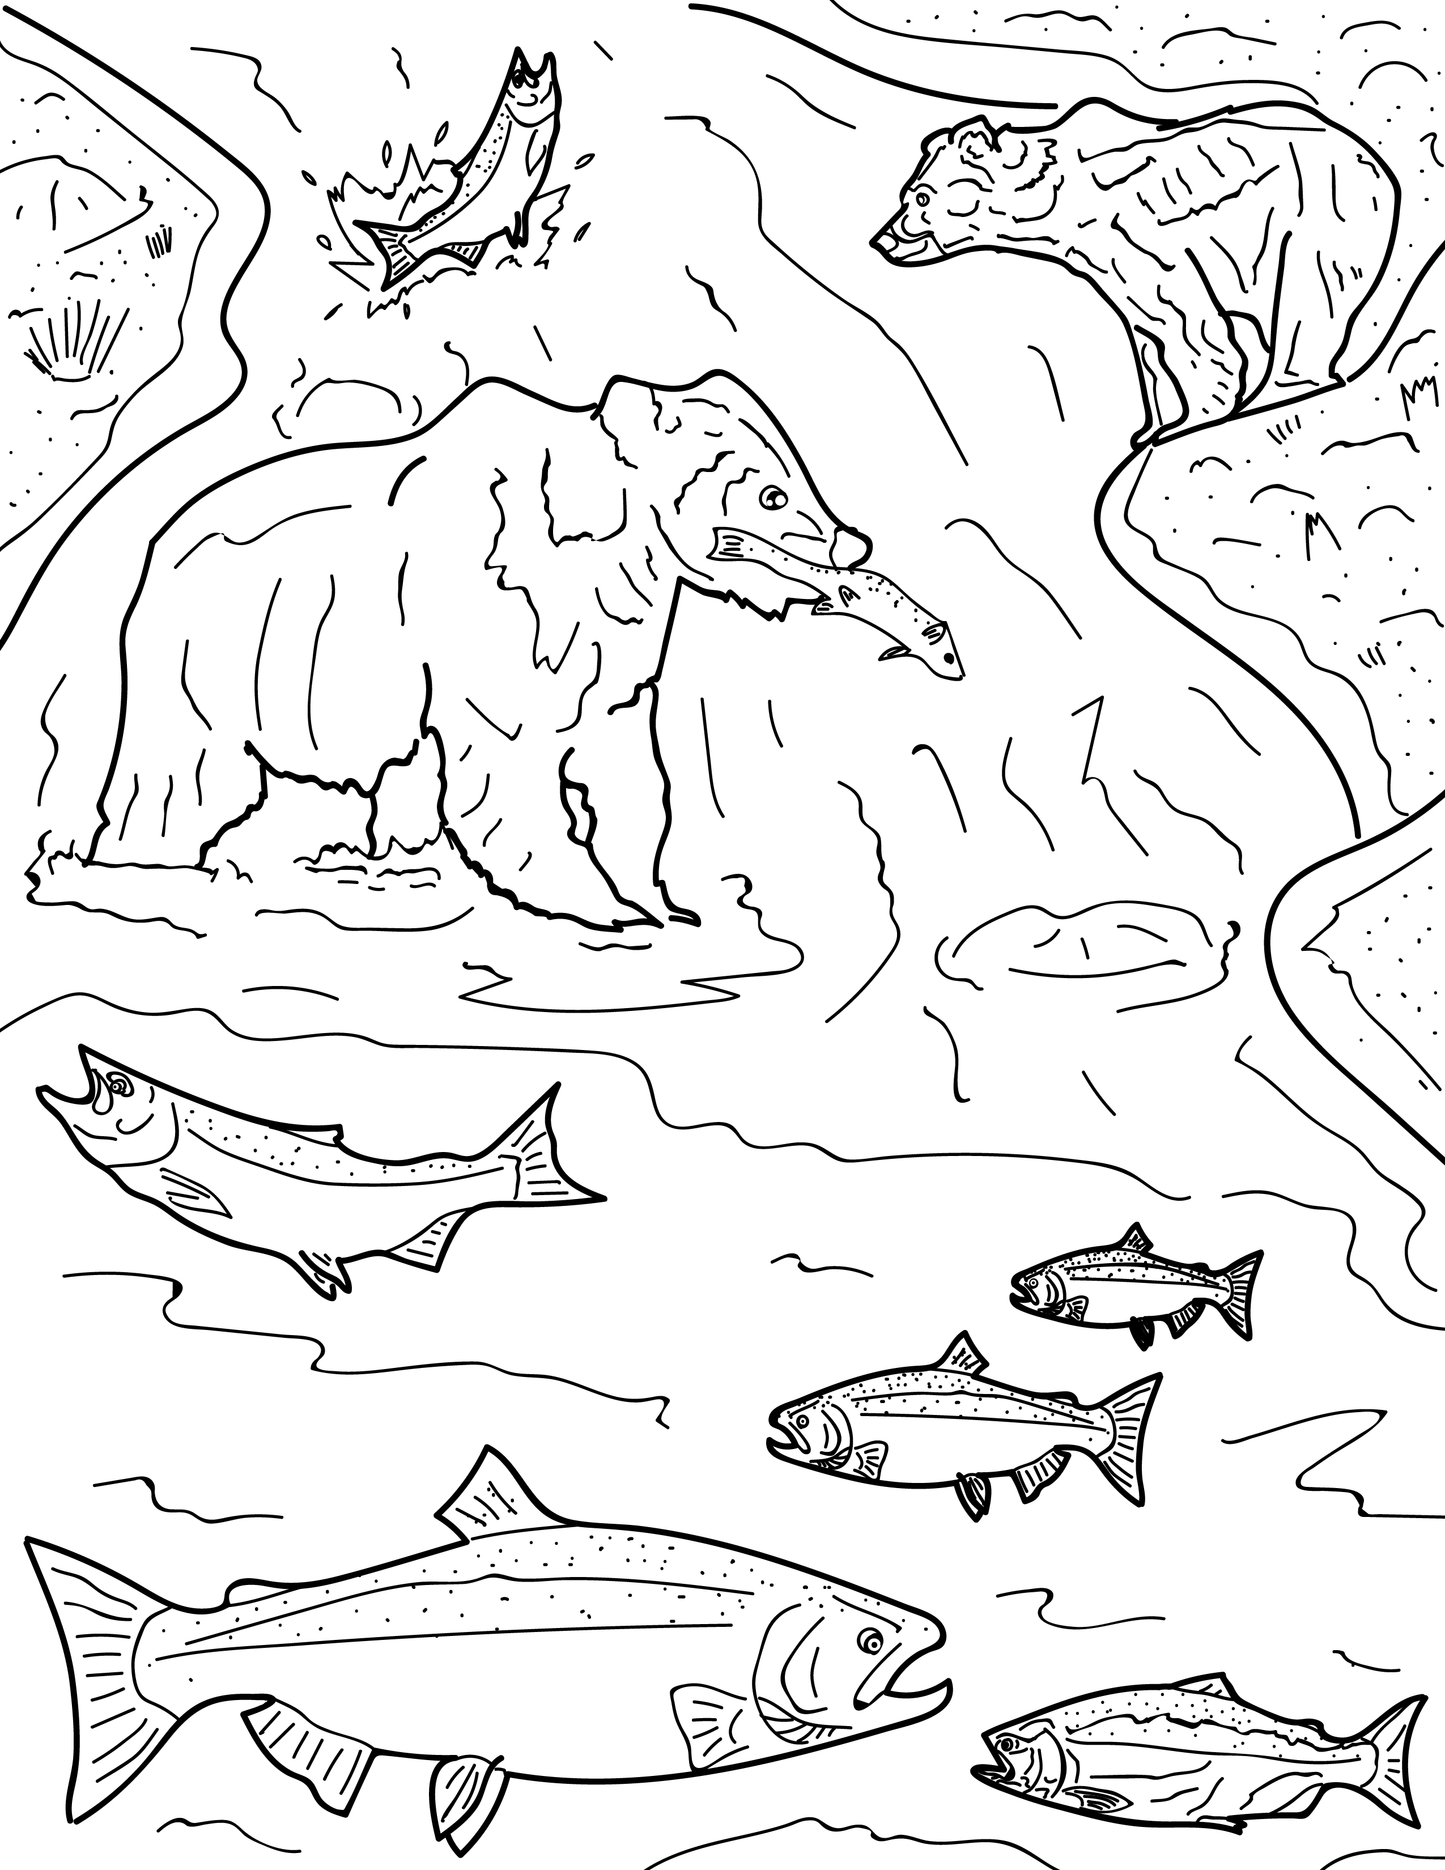 Pacific Northwest Wildlife Educational Coloring Book